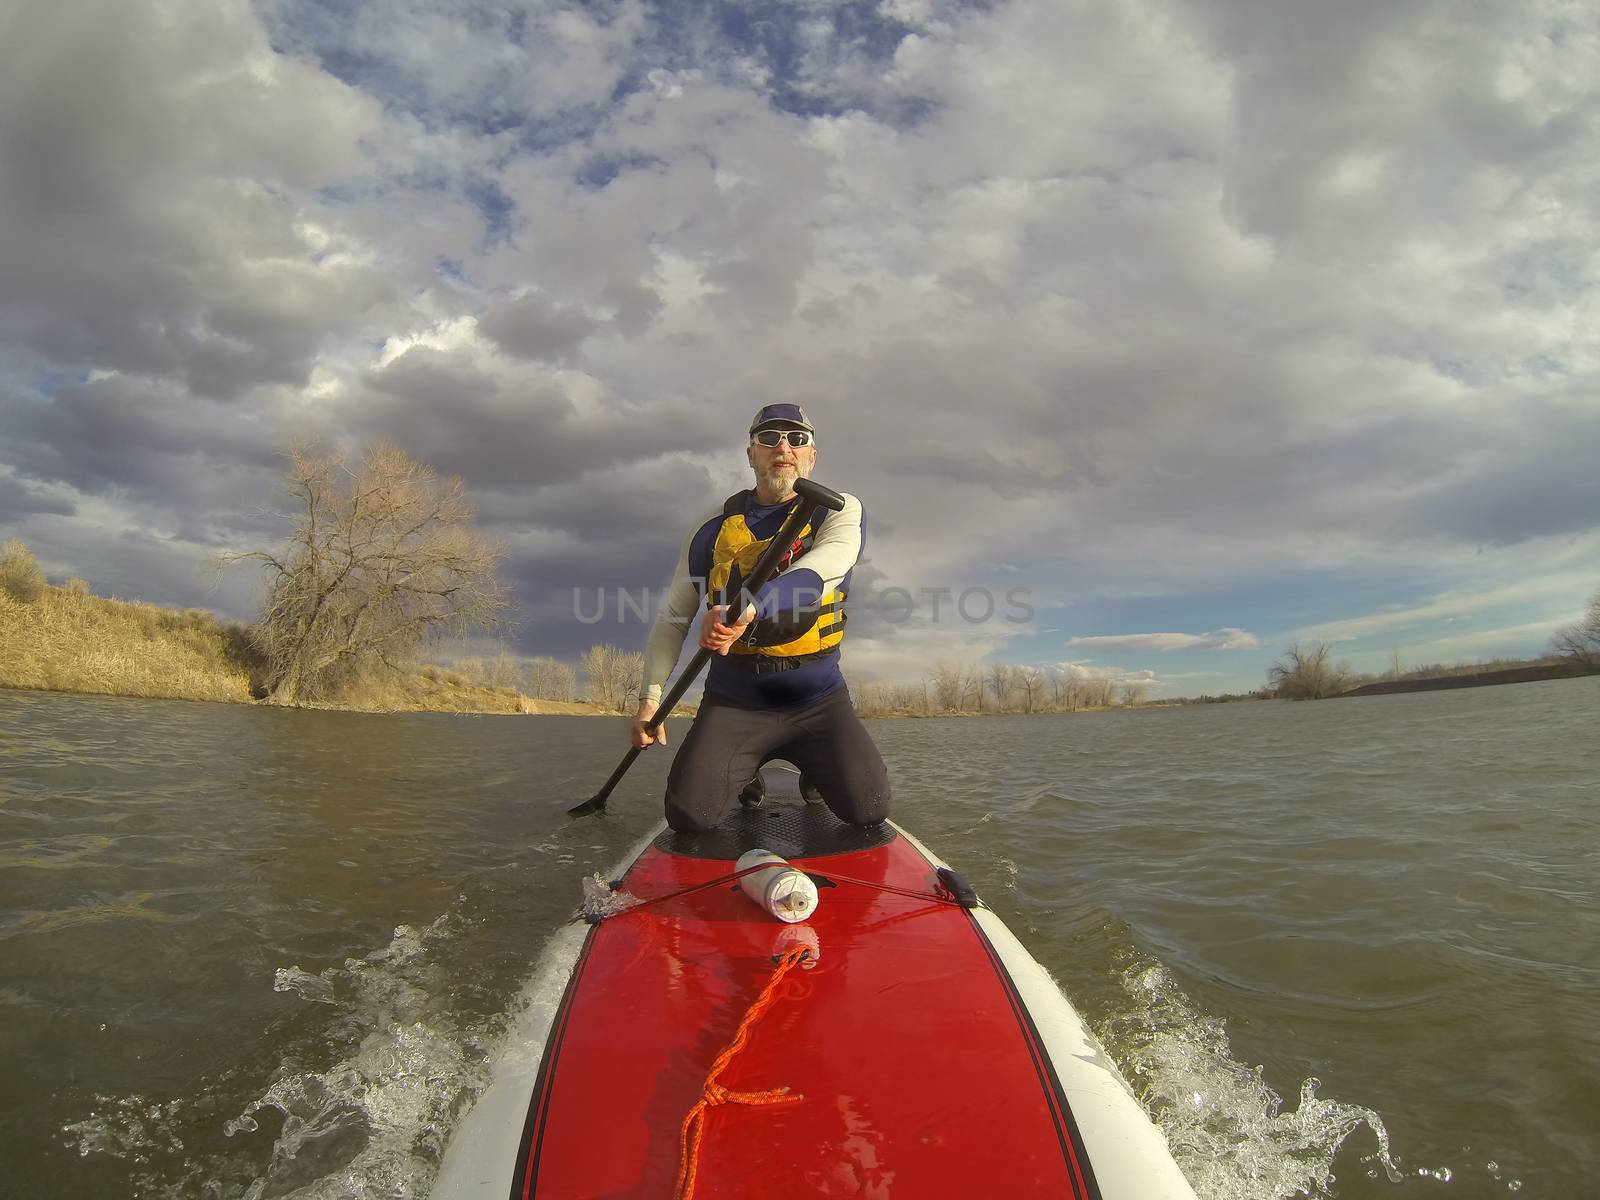 kneeling on stand up paddleboard by PixelsAway